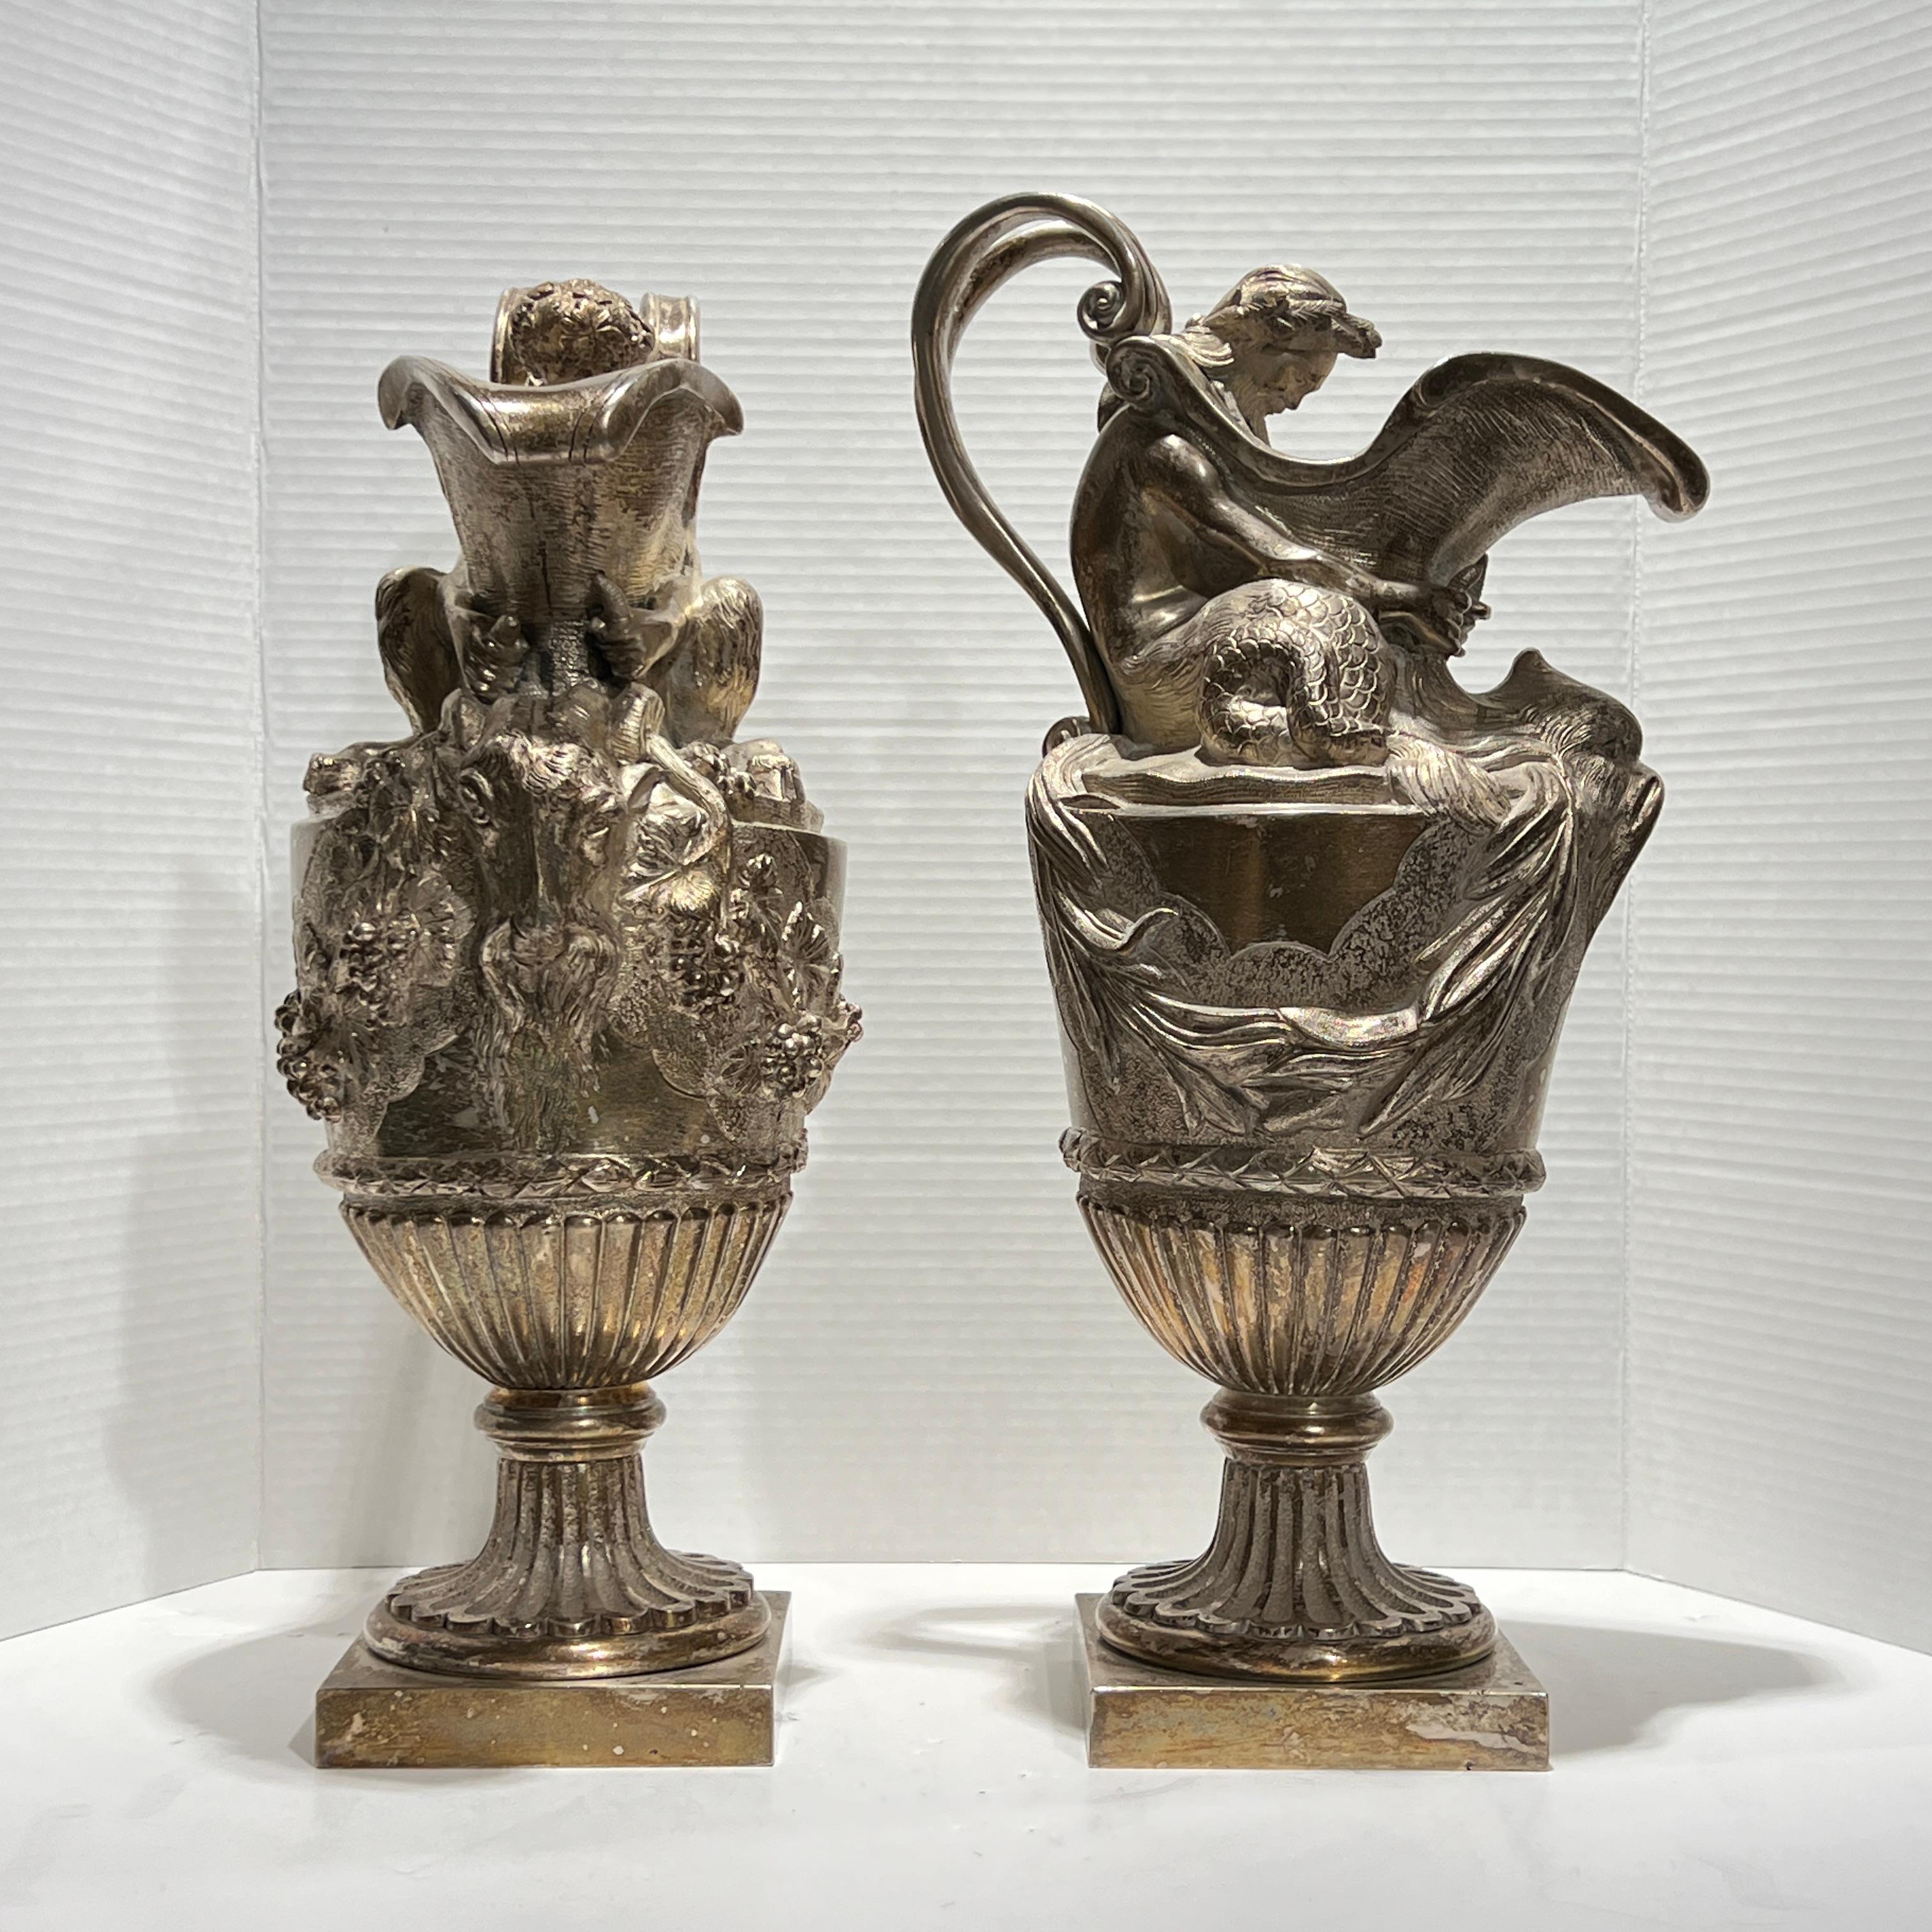 Neoclassical Revival Pair 19th Century French Silvered Bronze Ewer Form Vases in Louis XVI Style For Sale